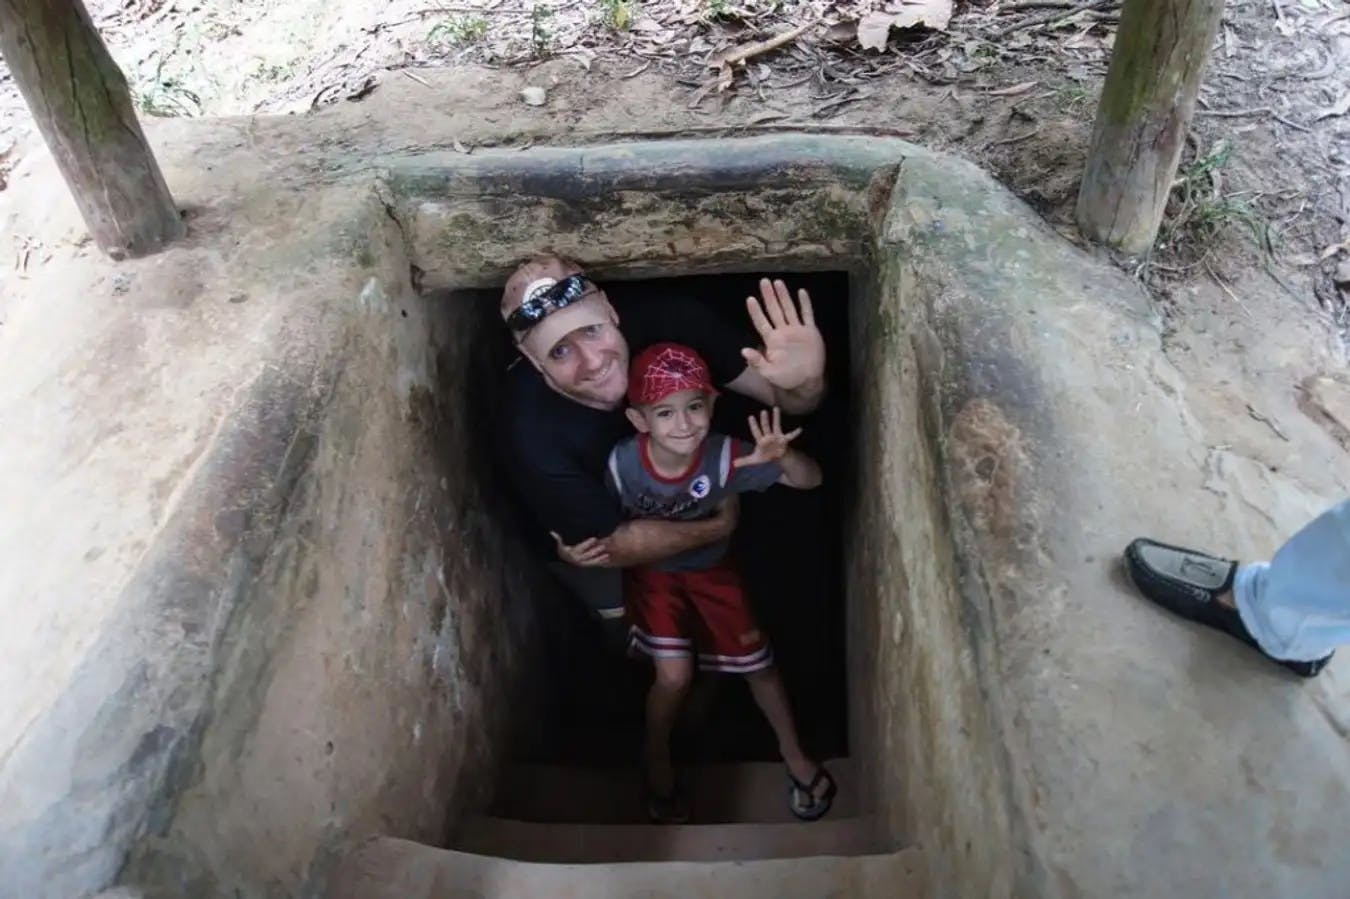 Experience Cuchi tunnels network